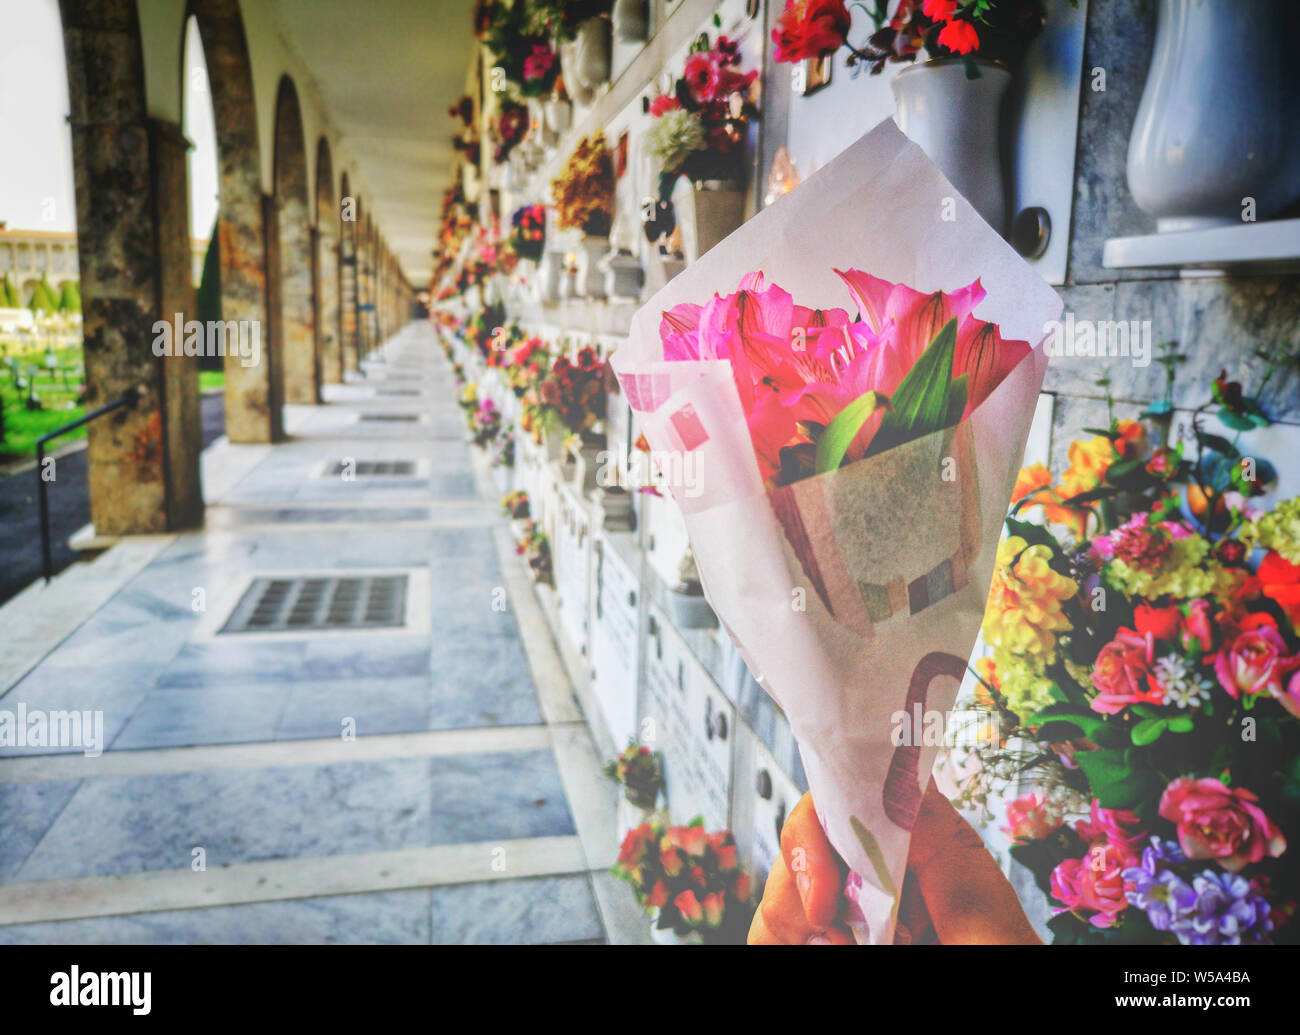 bring flowers to our loved ones at the cemetery during day of the dead Stock Photo